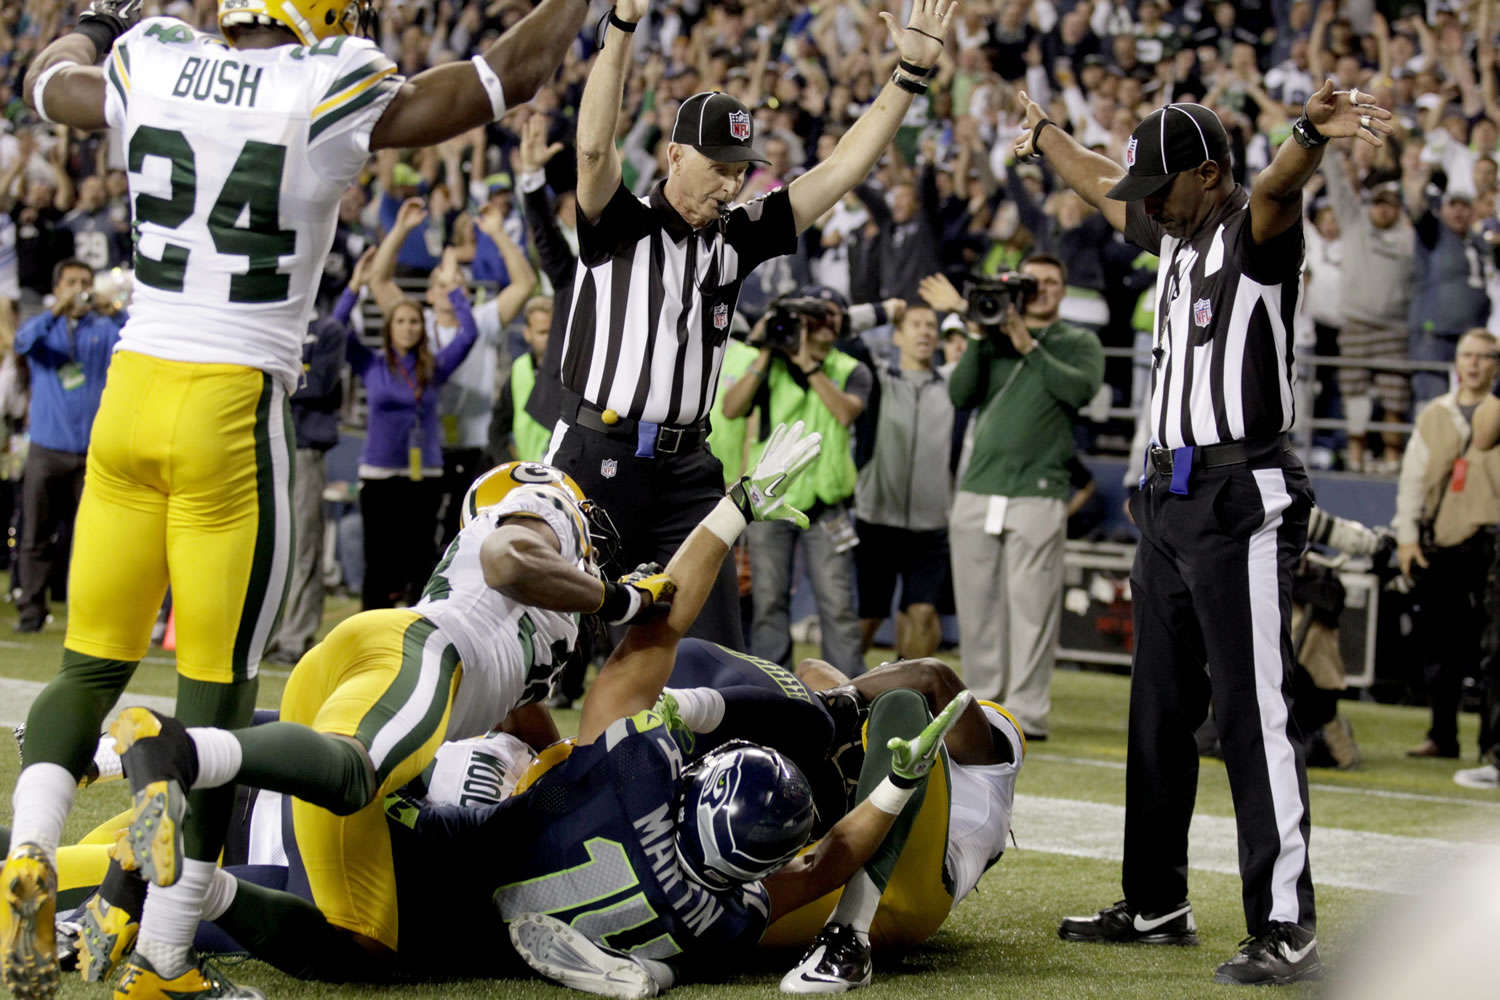 One official signals a touchdown, left, while the other one isn't sure on the final play of Monday's game. After video review, it was ruled Seattle's Golden Tate came up with the ball for the game-winning score.